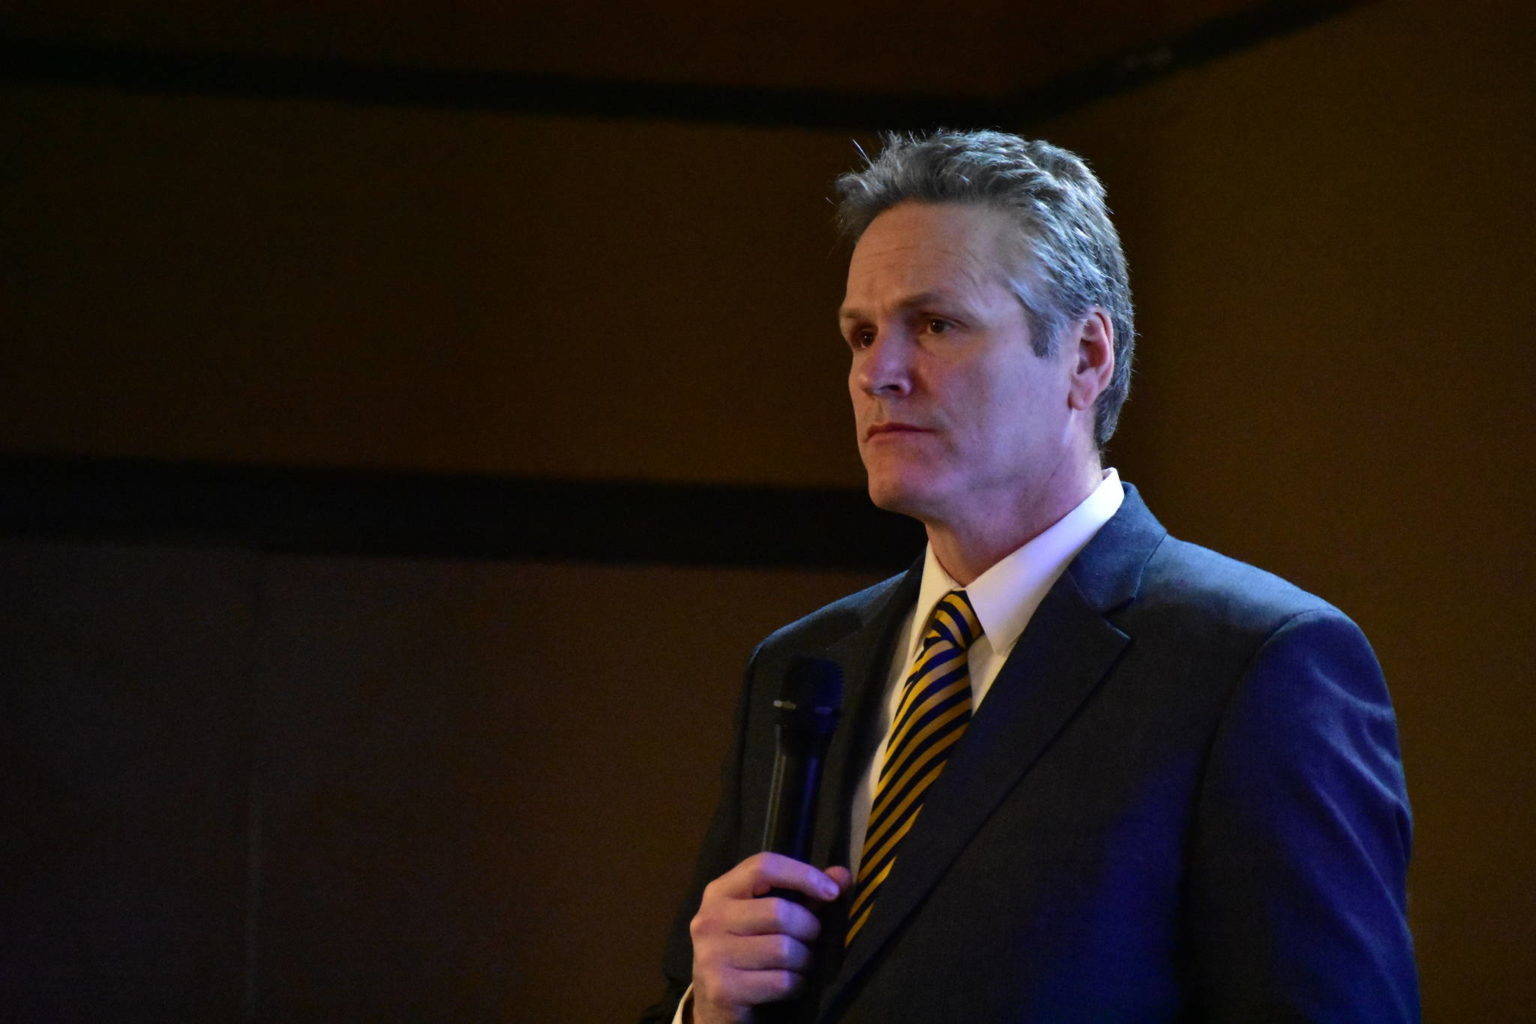 Gov. Mike Dunleavy addresses the public during a virtual town hall on Sept. 15, 2020 in Alaska. Dunleavy tested positive for COVID-19 his office announced Wednesday. (Courtesy Photo / Office of the Governor)